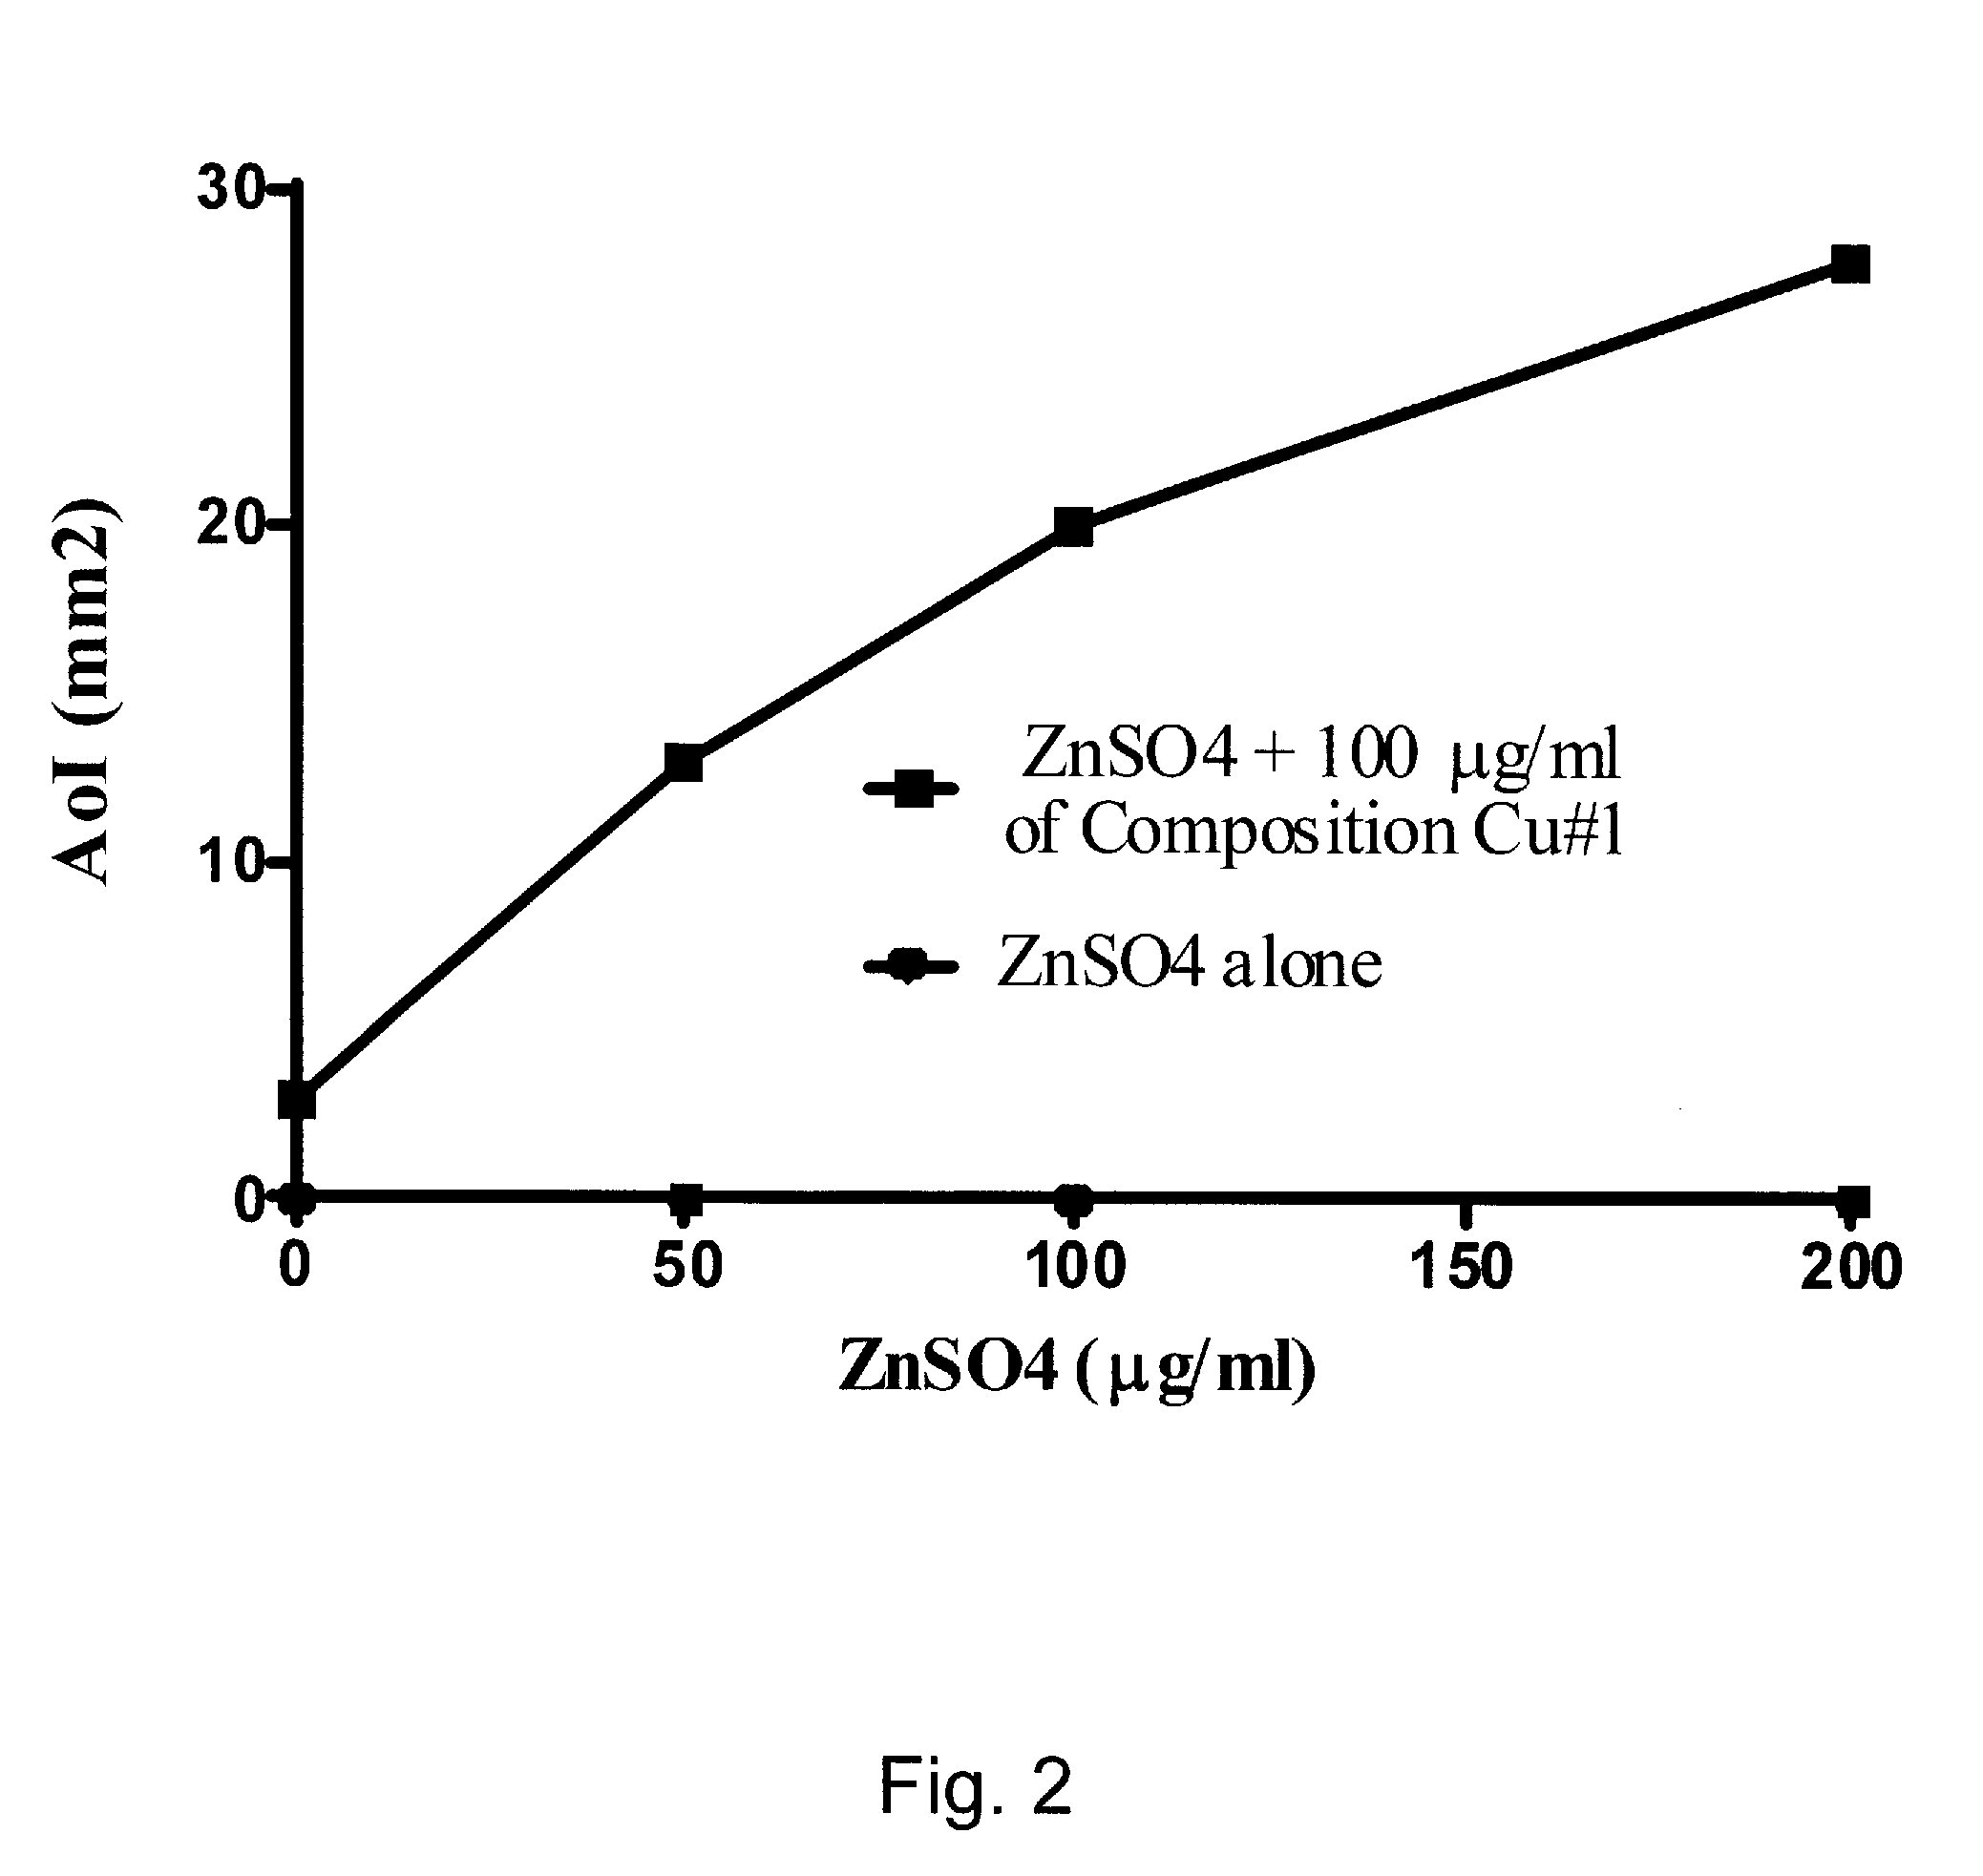 Acid-Solubilized Copper-Ammonium Complexes and Copper-Zinc-Ammonium Complexes, Compositions, Preparations, Methods, and Uses